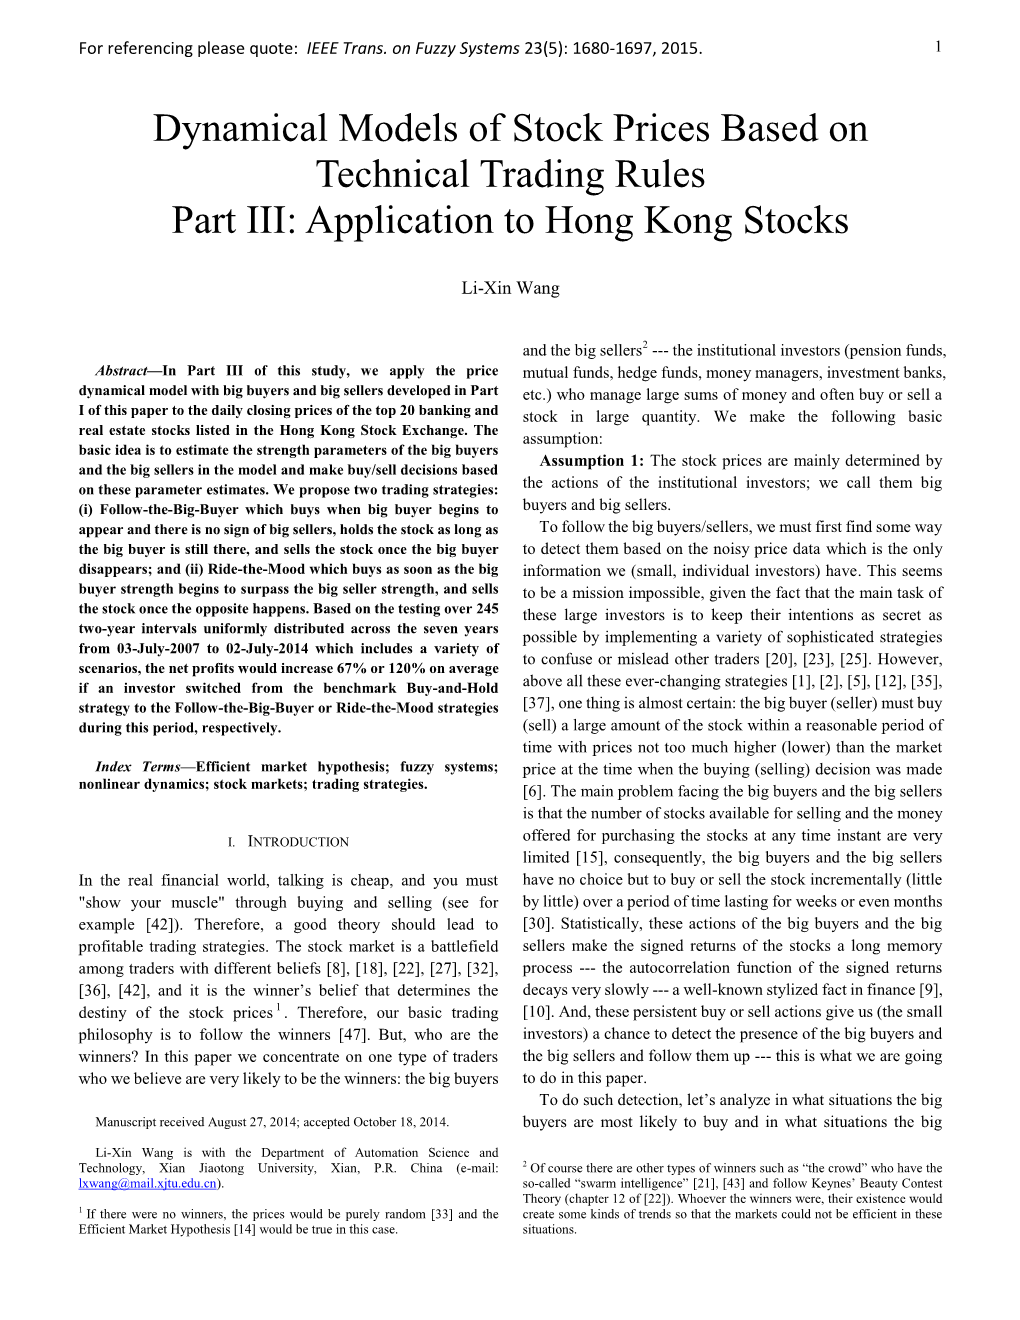 Dynamical Models of Stock Prices Based on Technical Trading Rules Part III: Application to Hong Kong Stocks